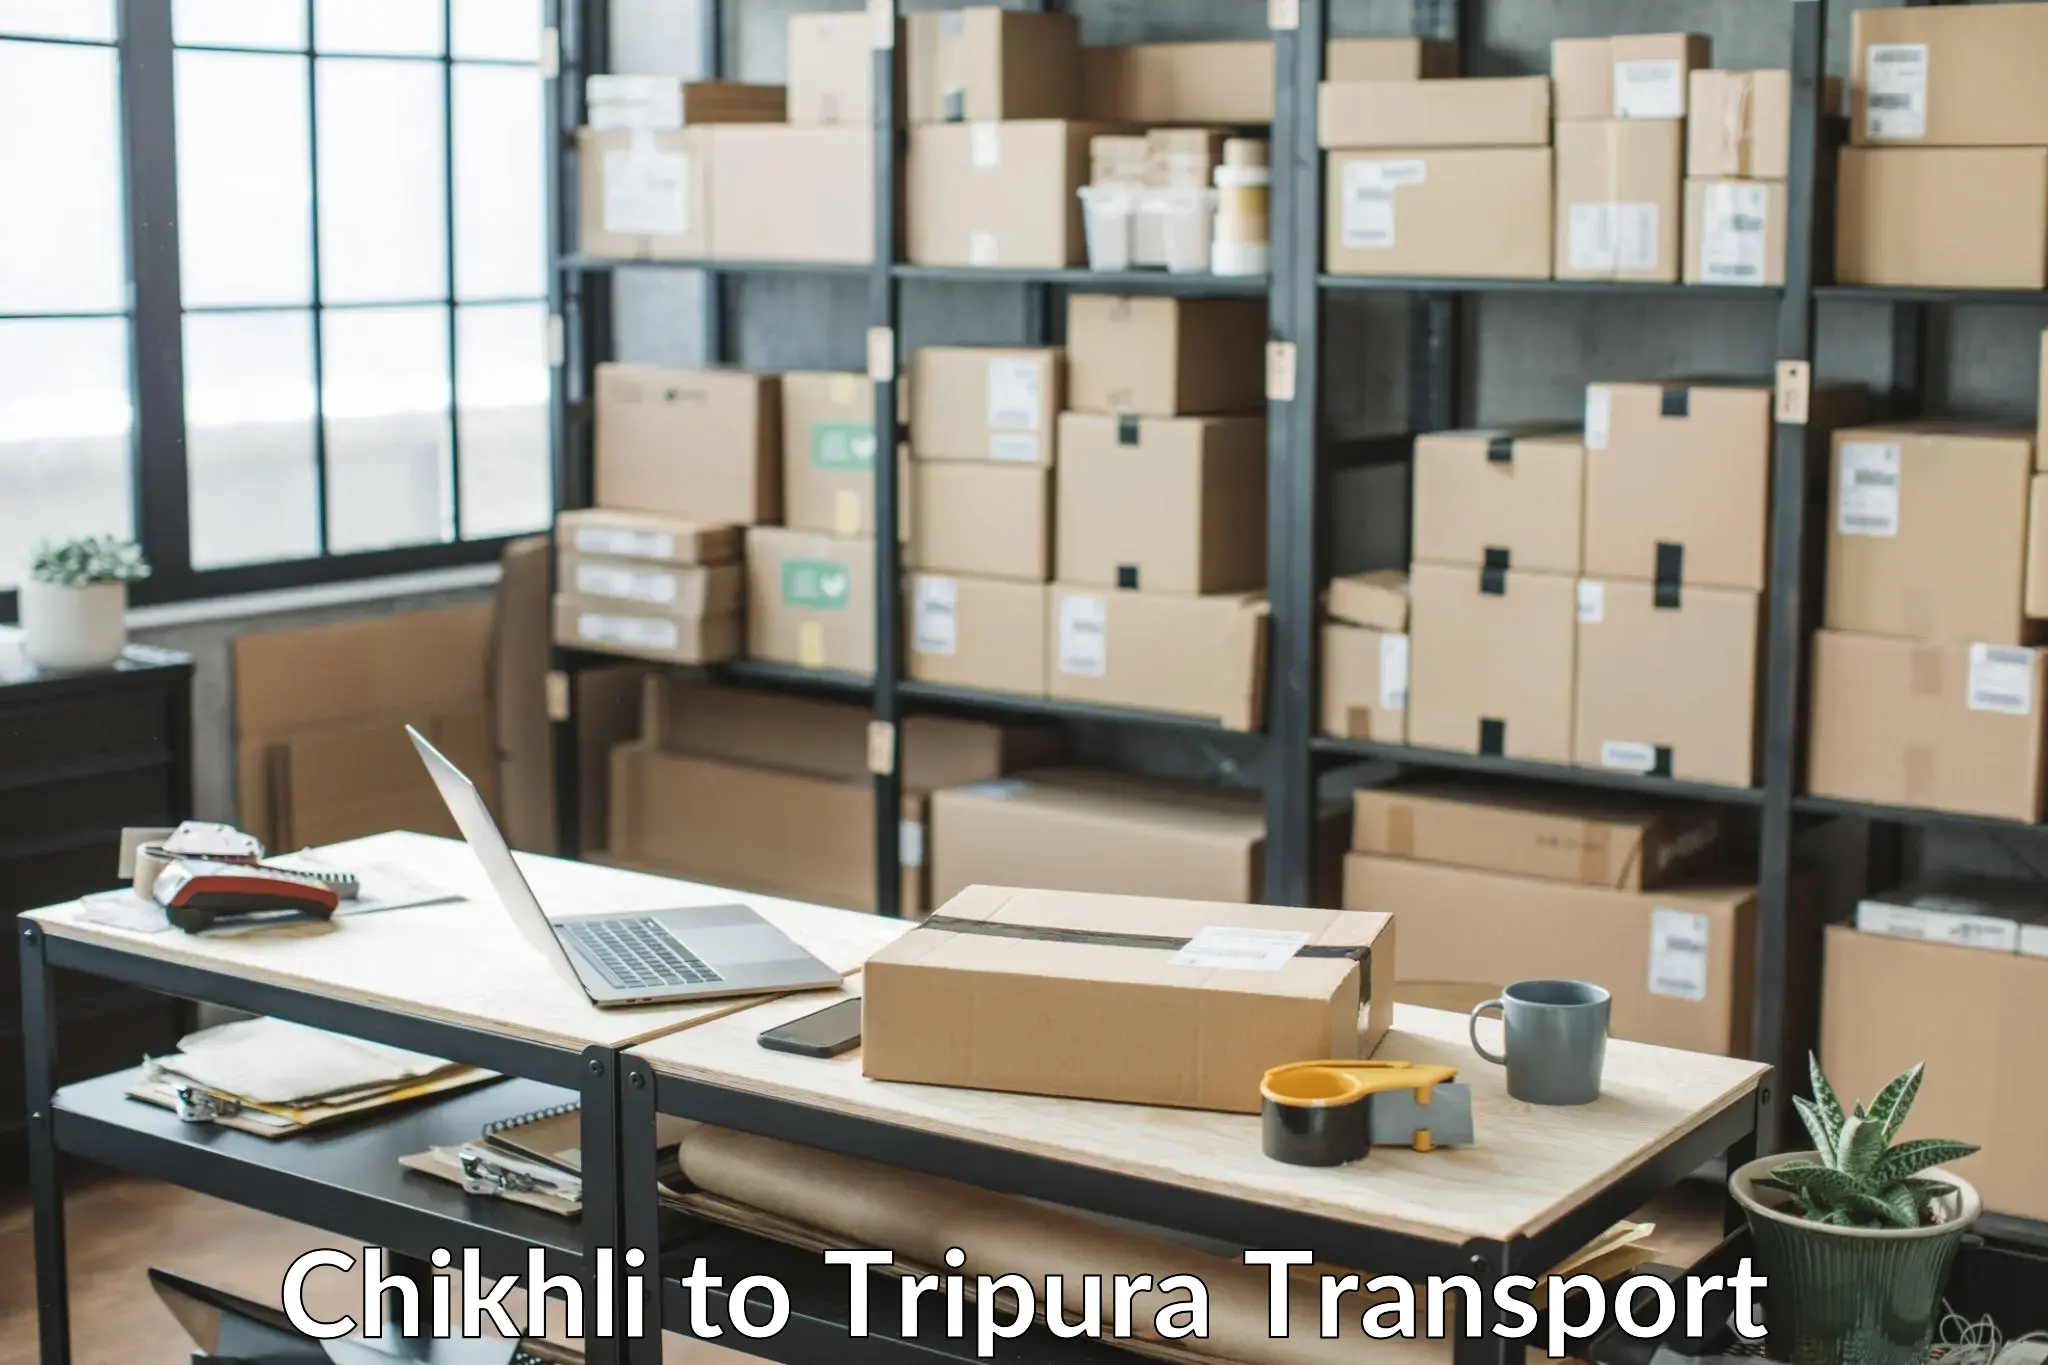 Container transportation services Chikhli to Udaipur Tripura